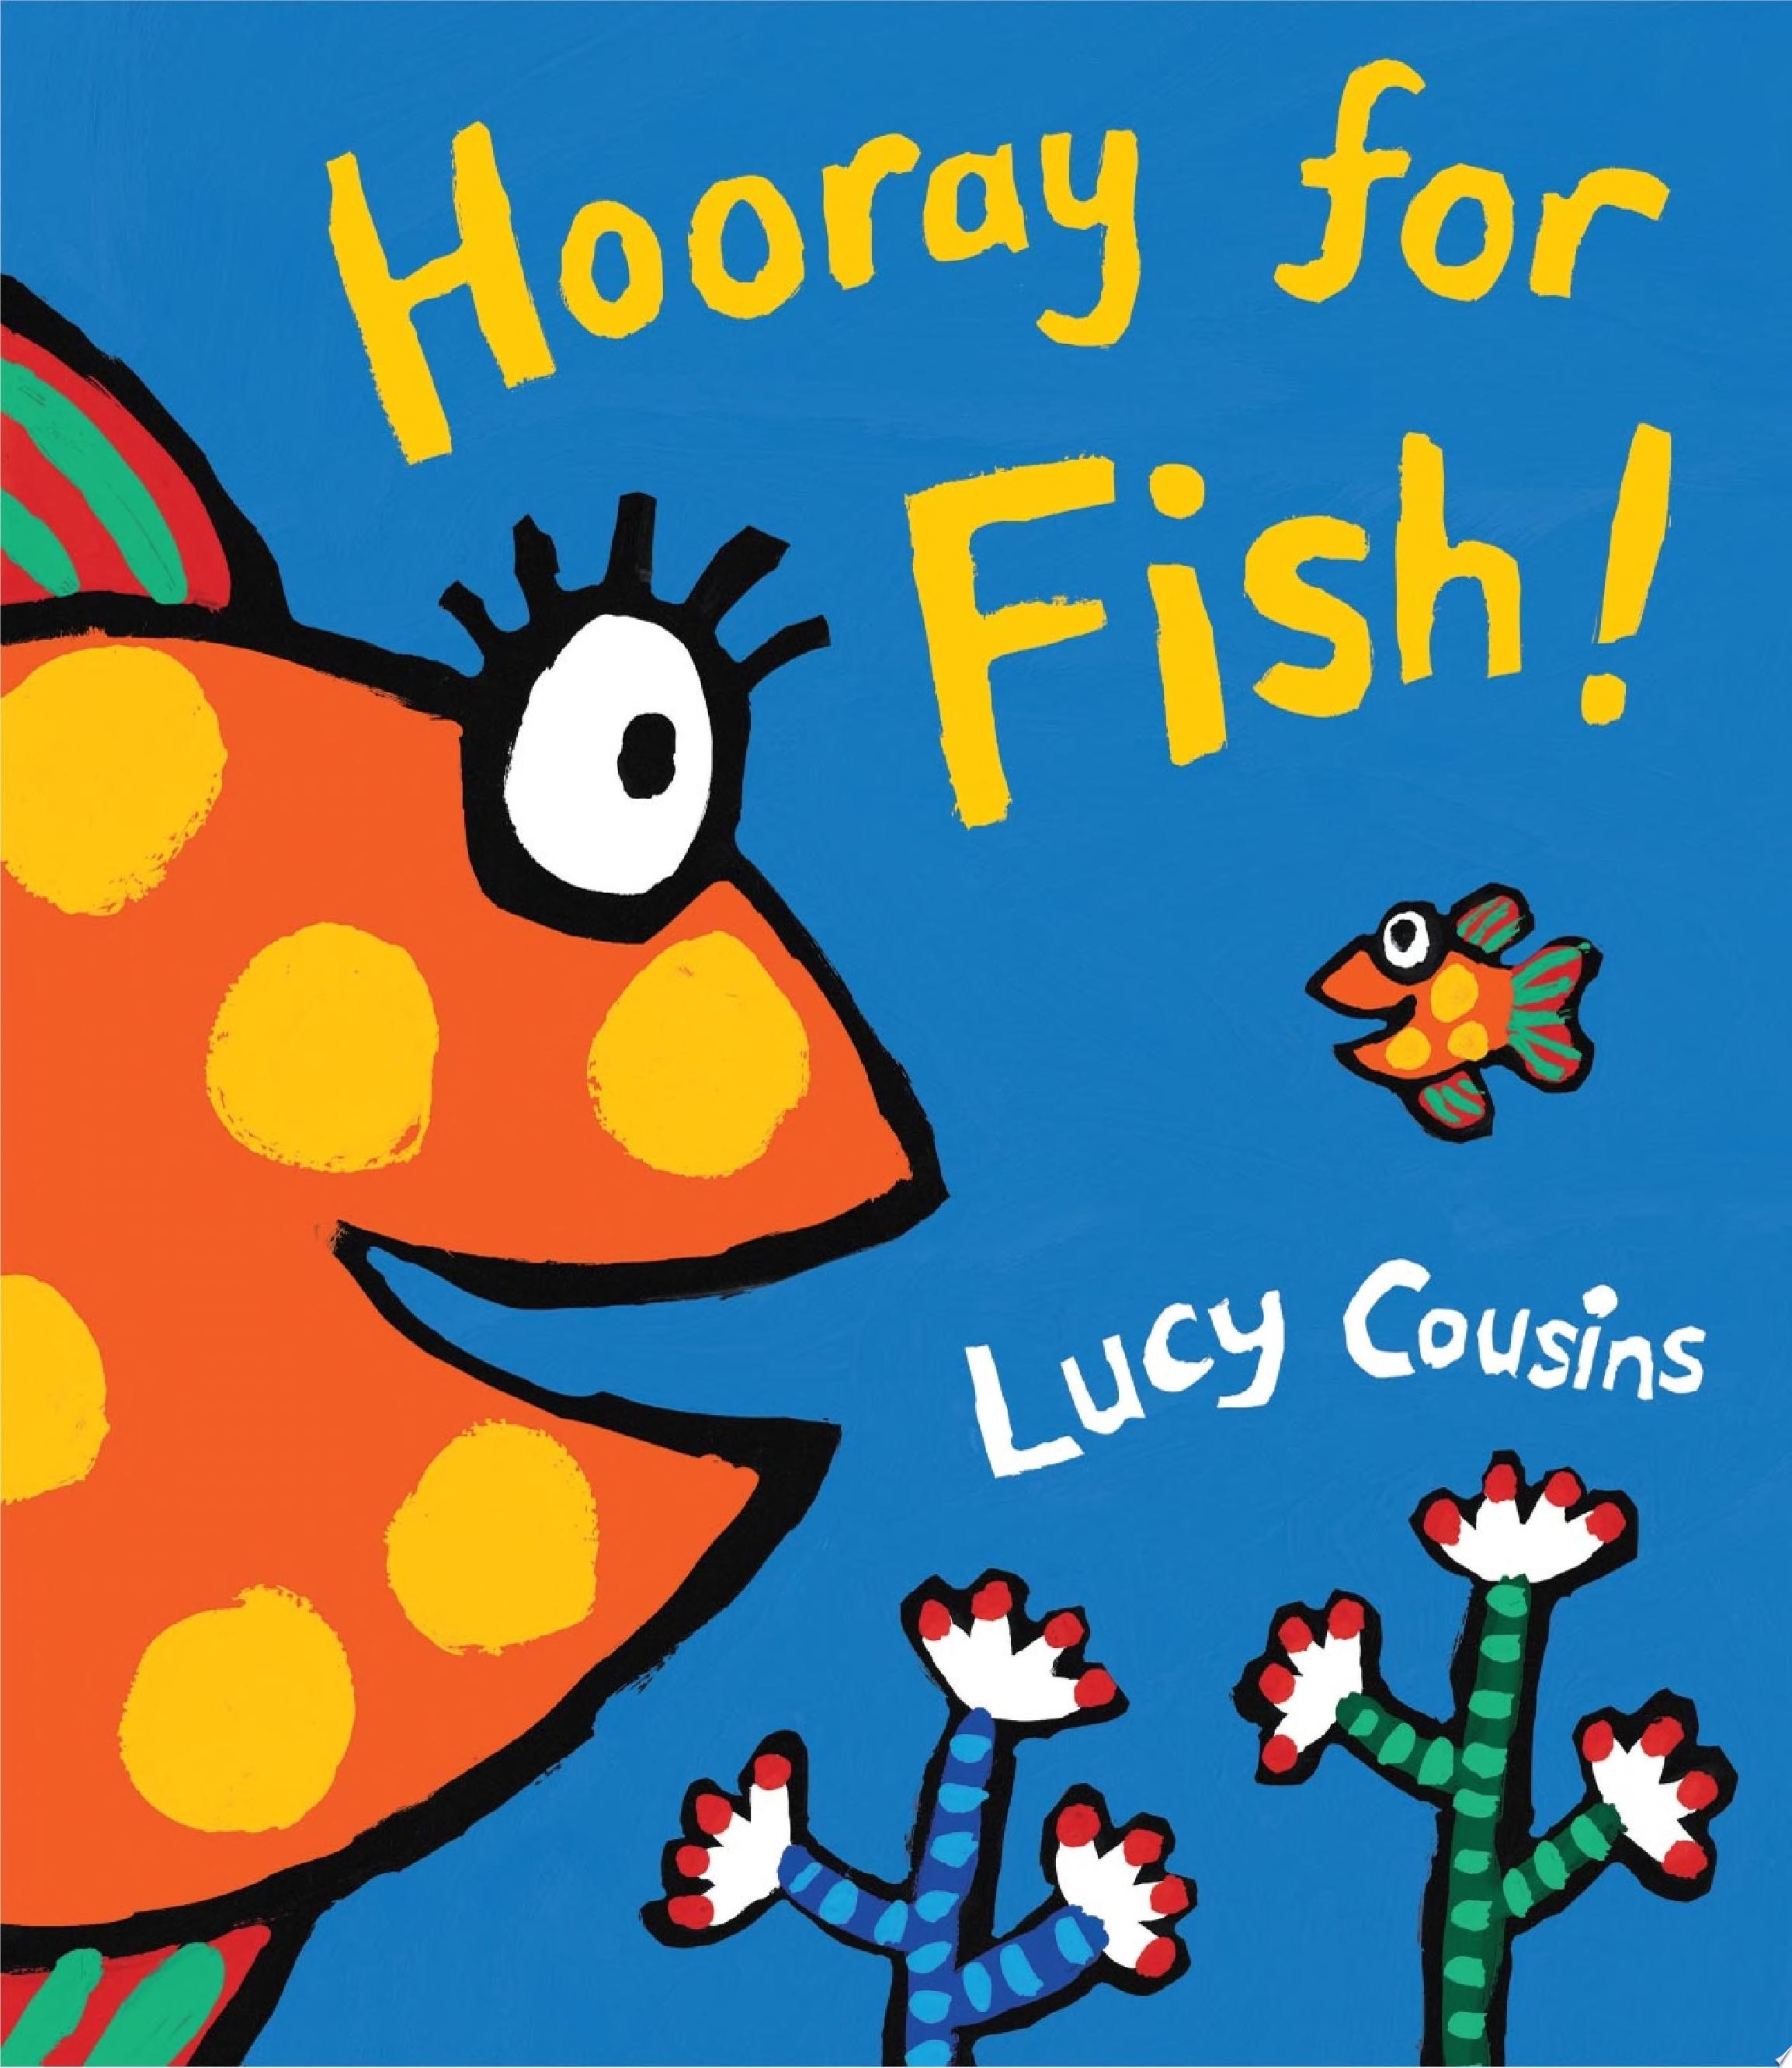 Image for "Hooray for Fish!"